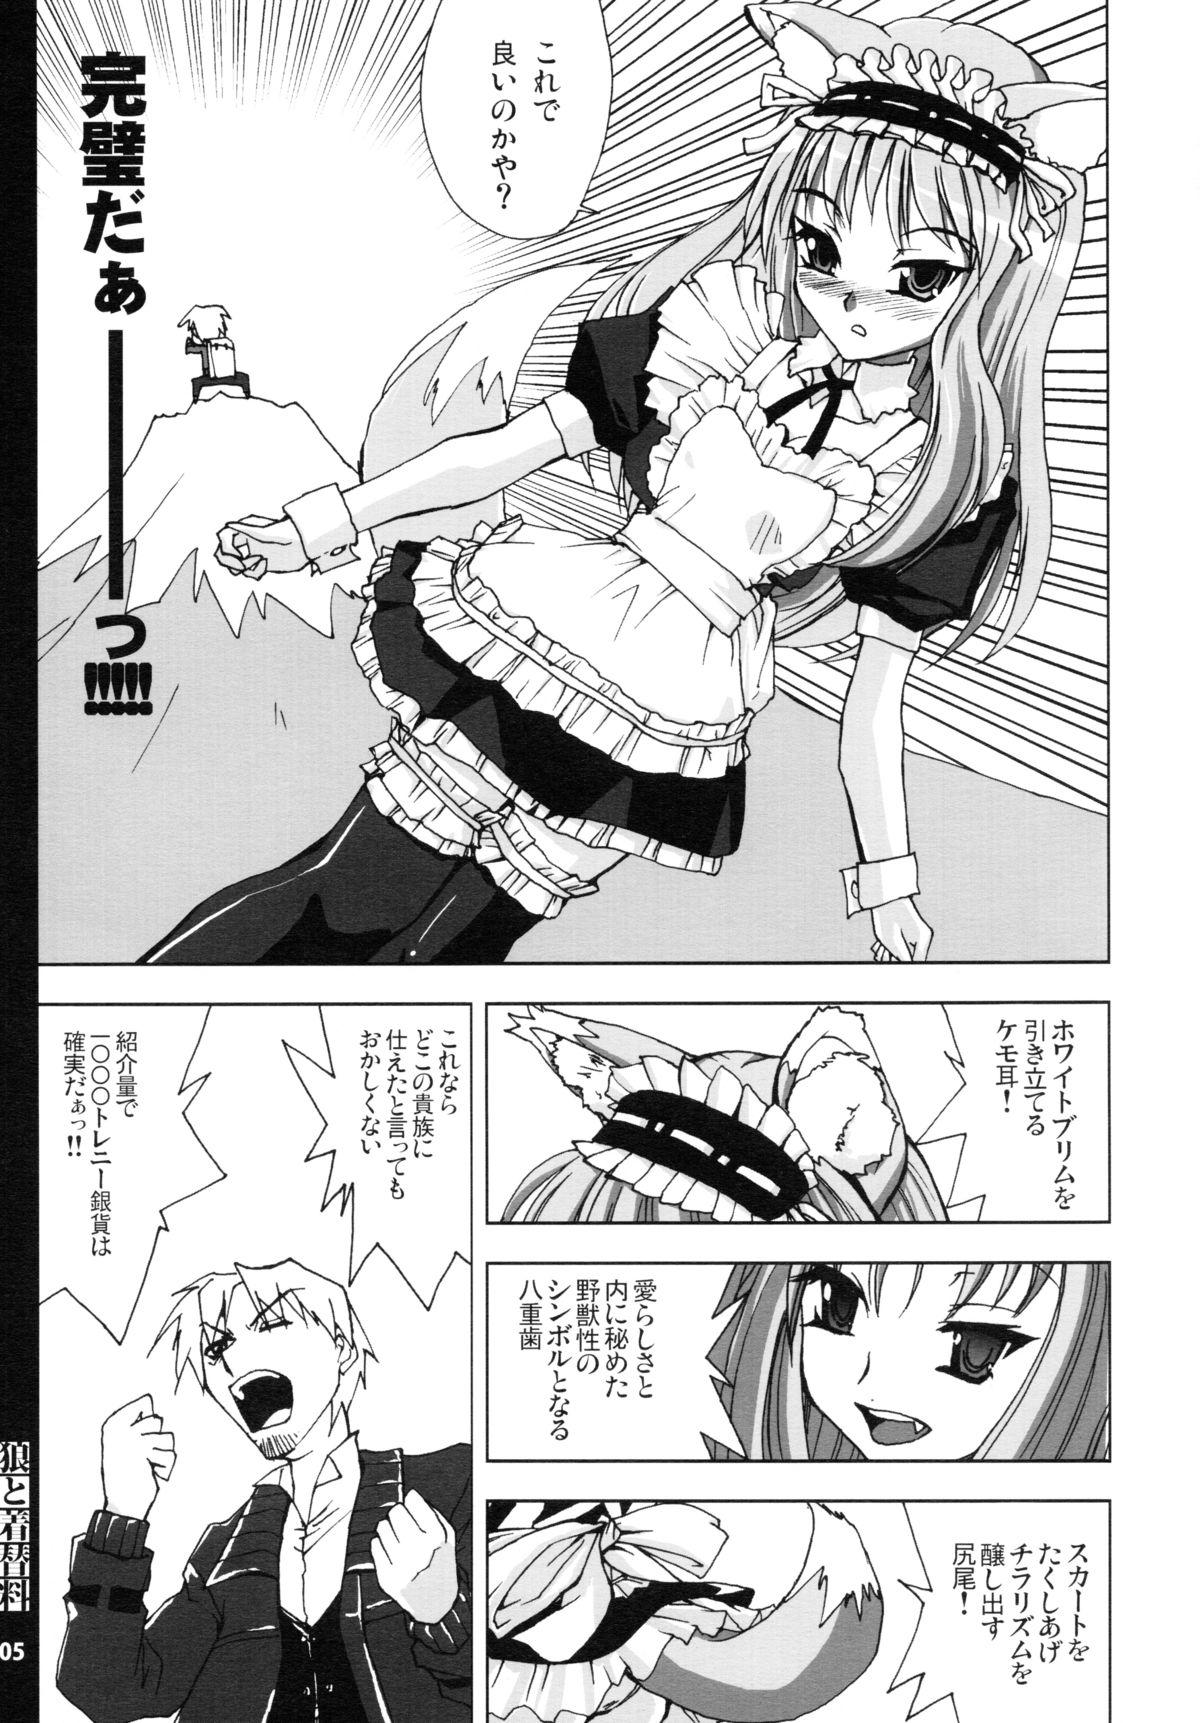 Peitos Ookami to Cosplay-ryou - Spice and wolf Tranny Sex - Page 5